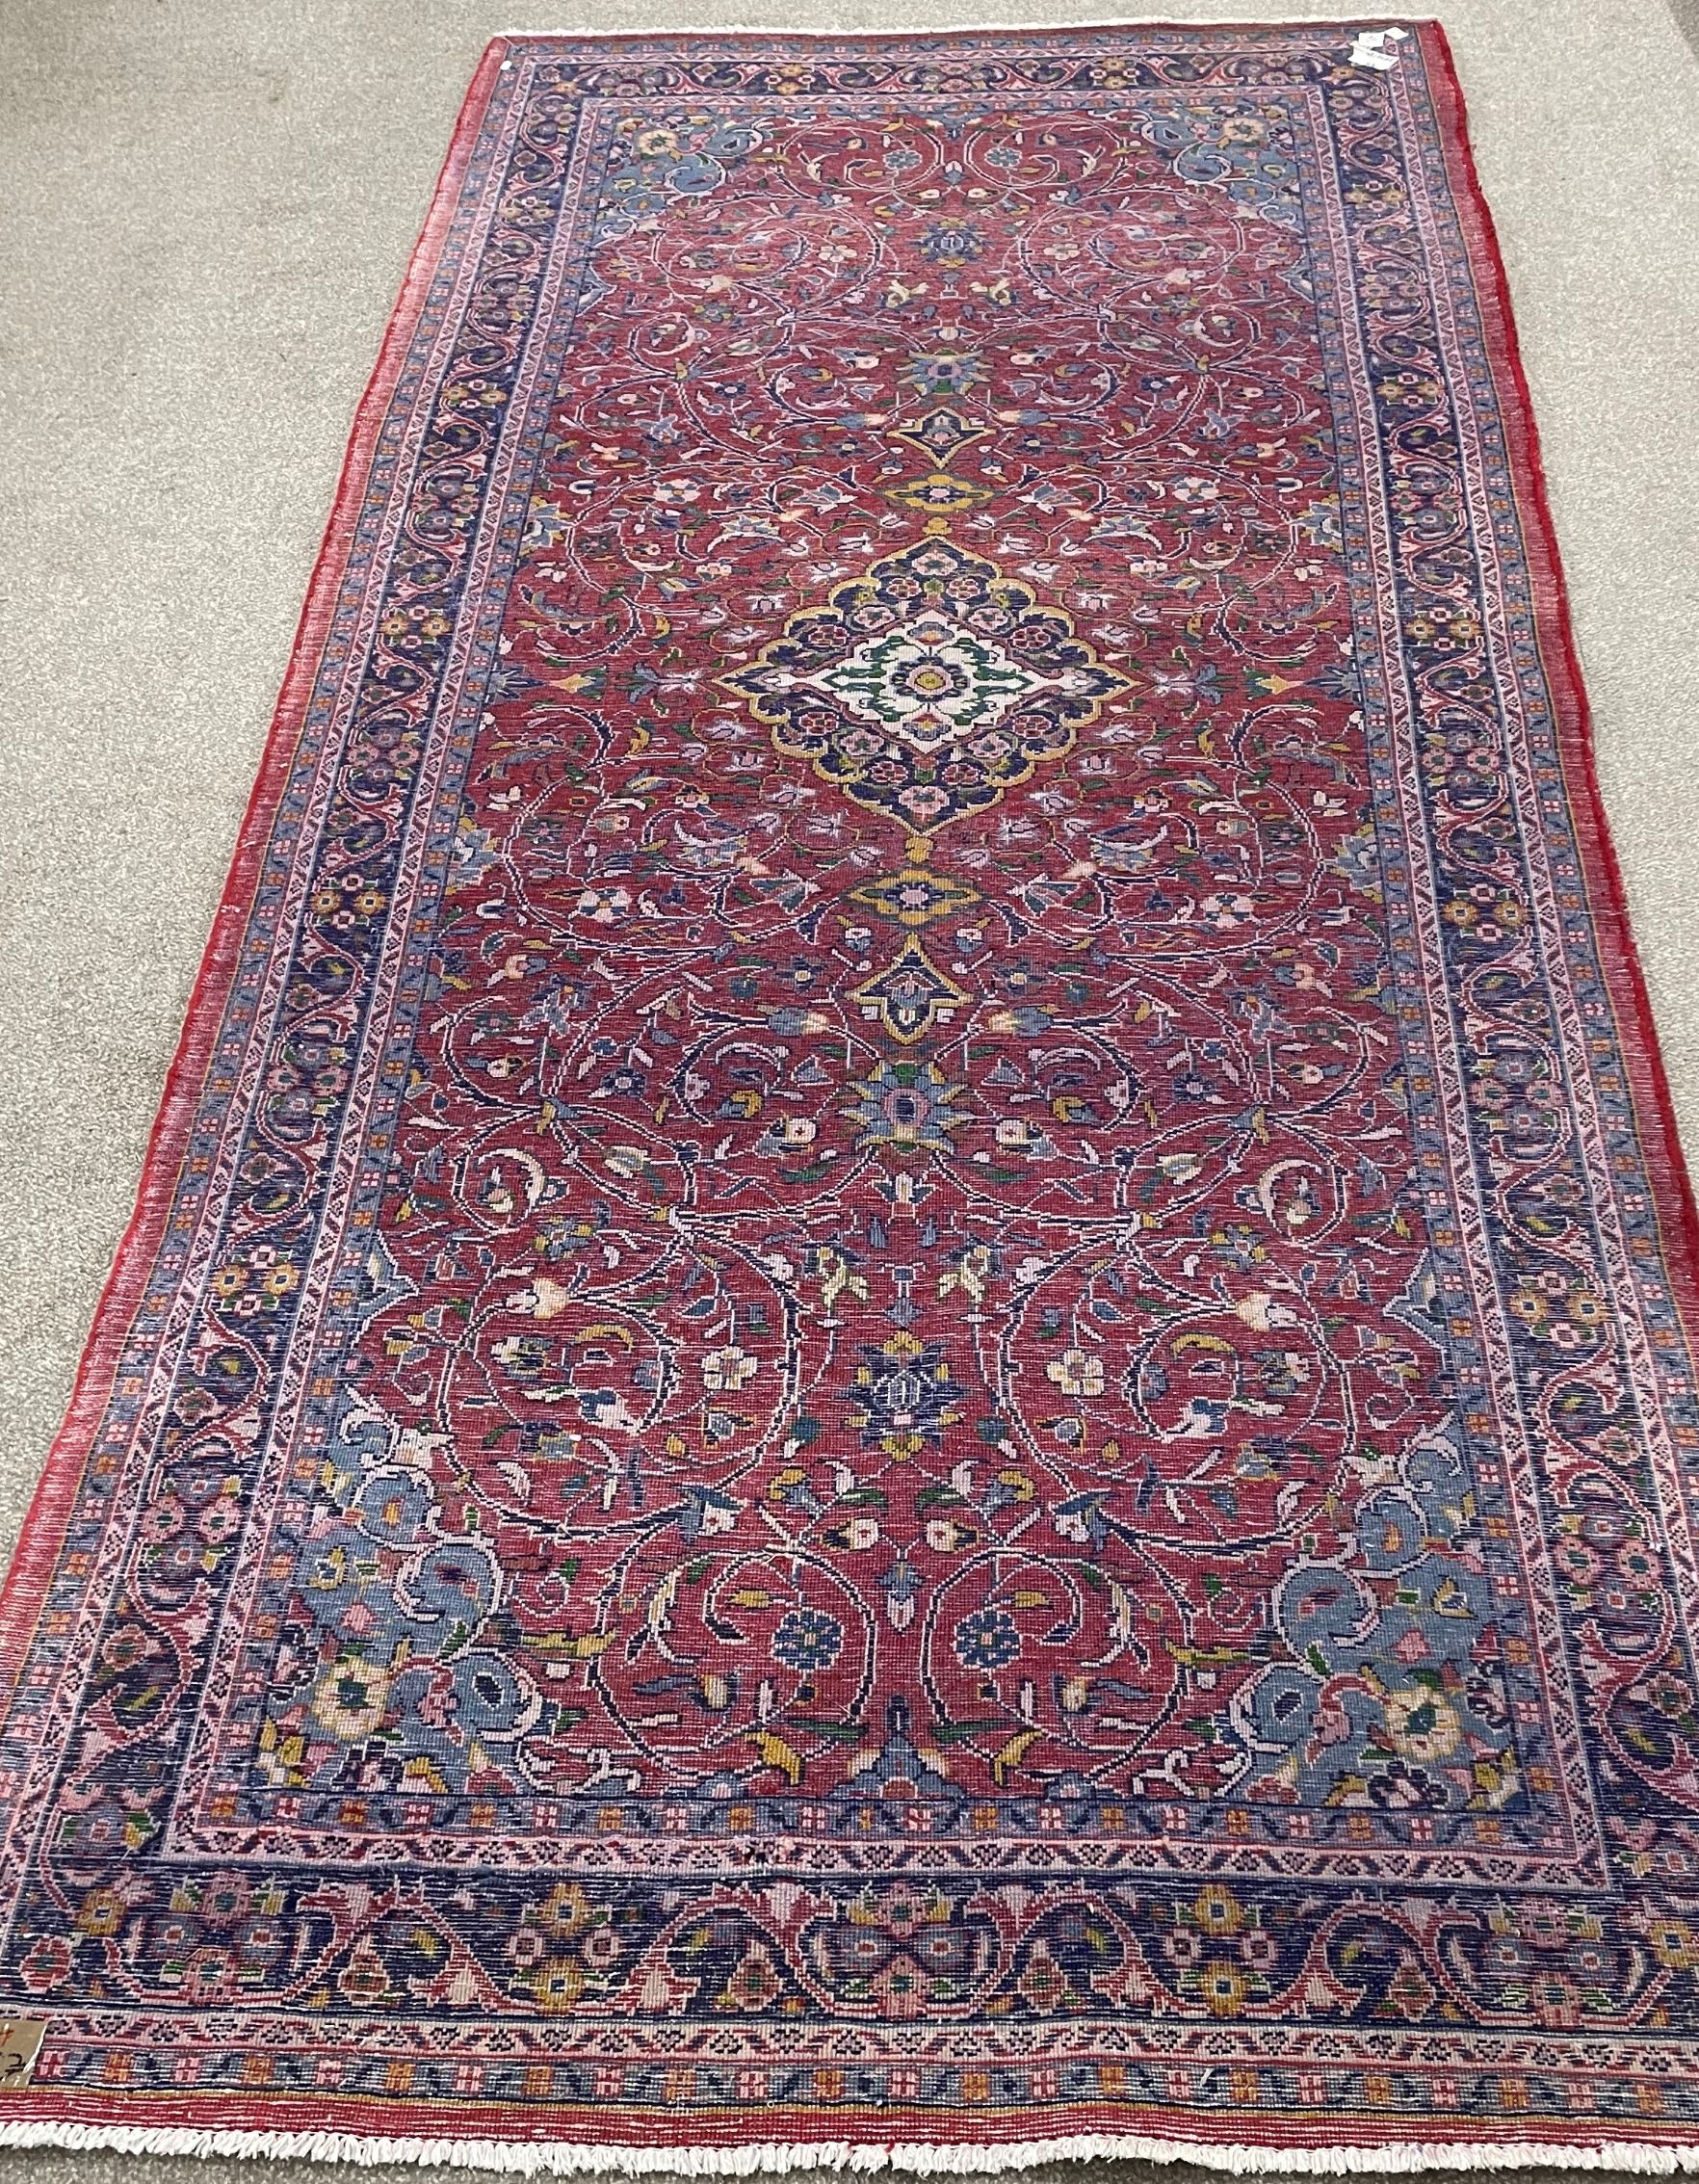 Washed red ground full pile Persian Sarouk runner with floral medallion 340cm by 160cm - Image 3 of 3